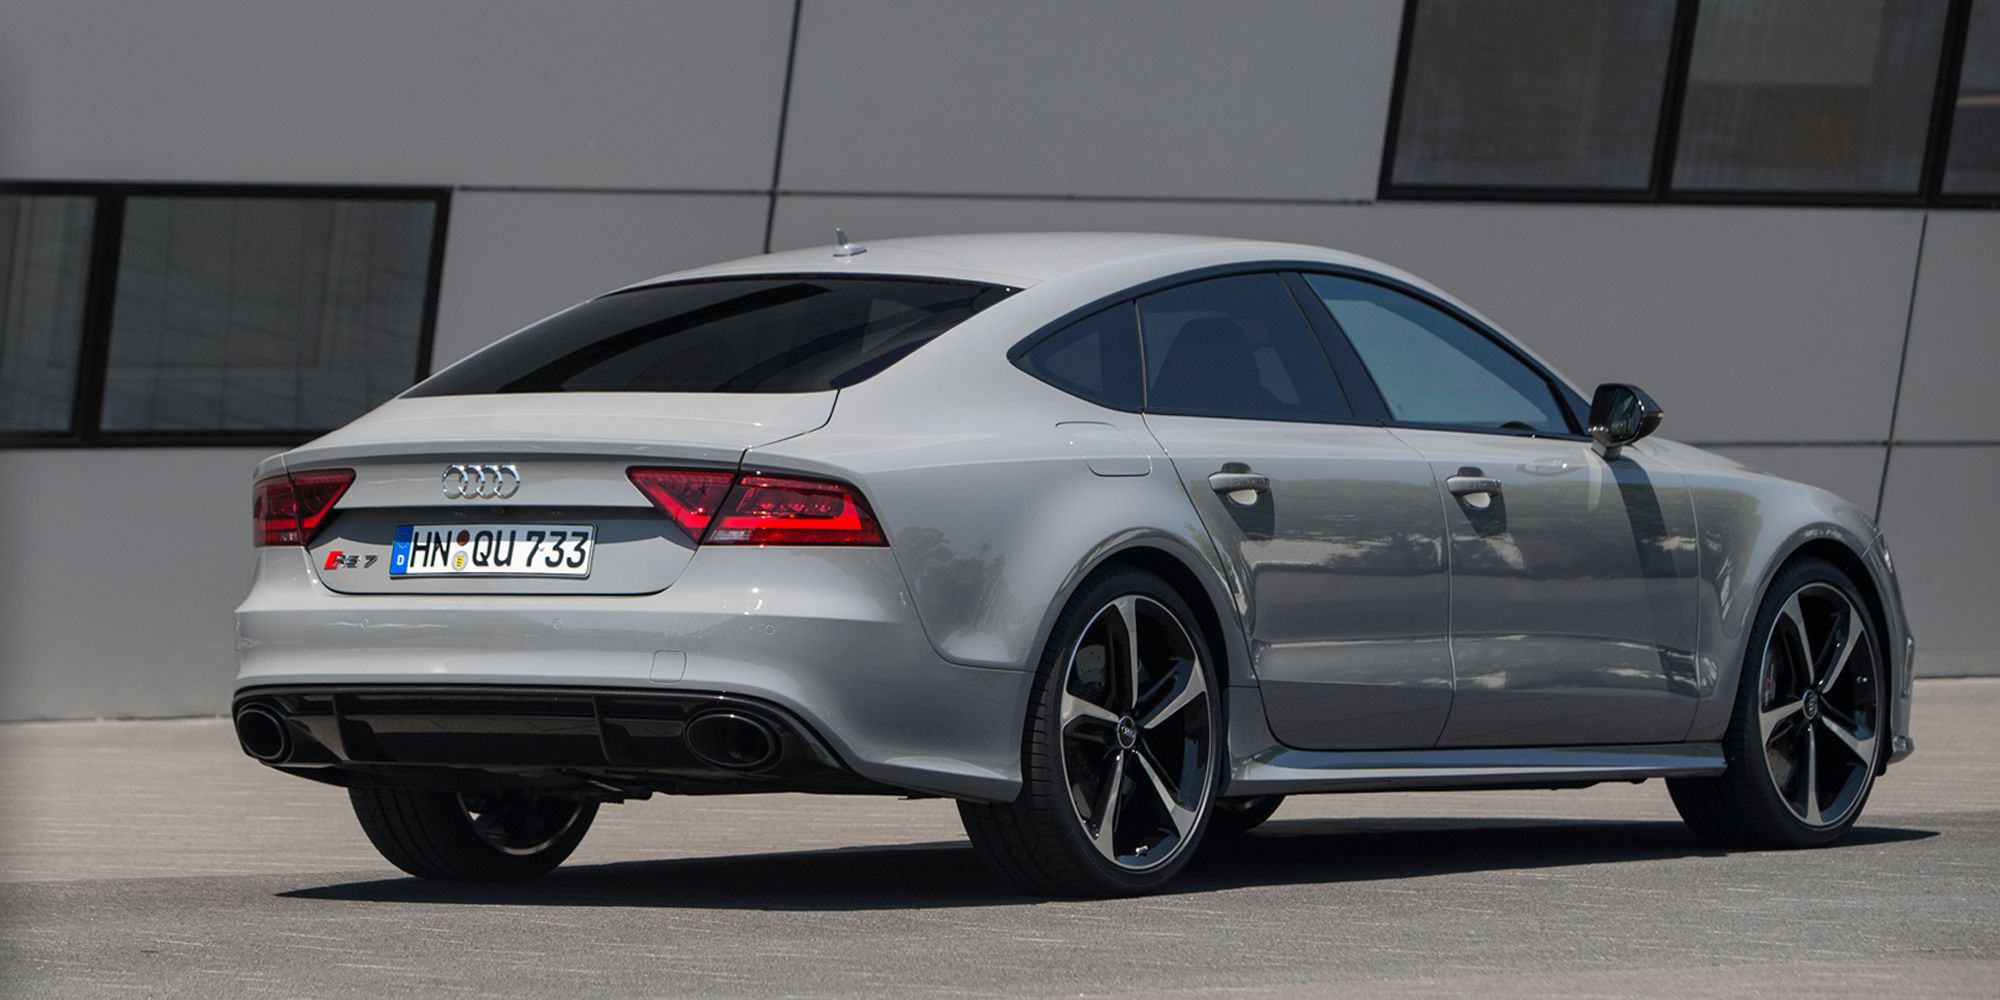 The rear of the RS7